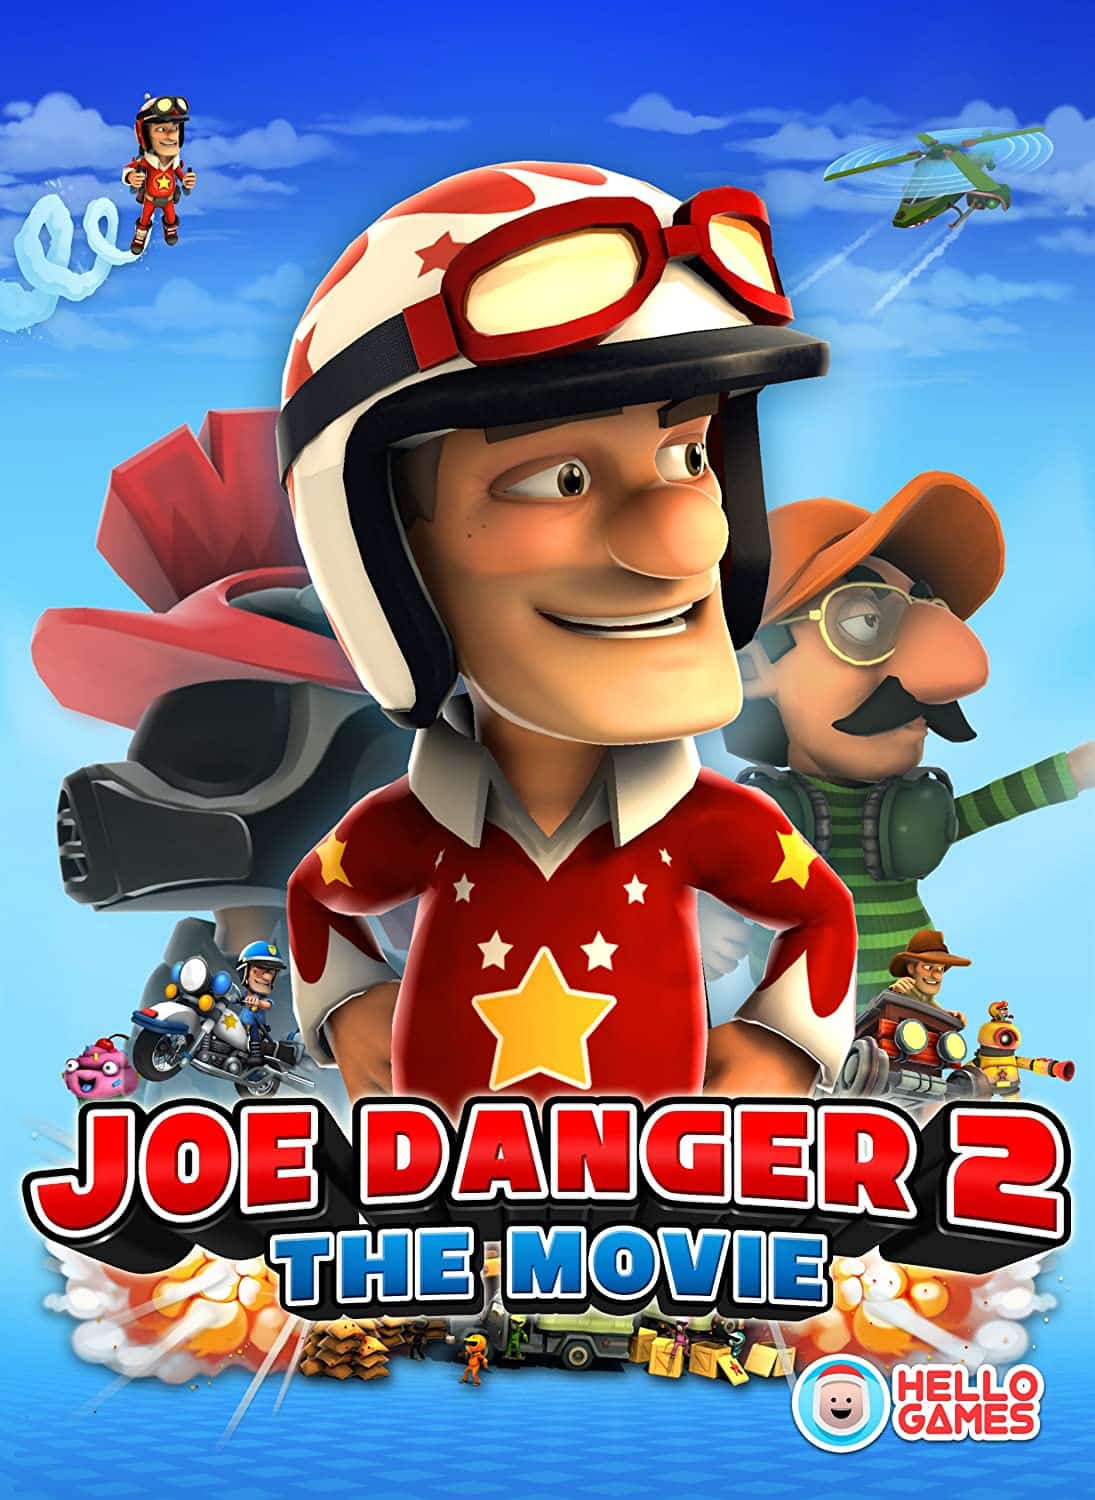 Joe Danger 2: The Movie player count stats